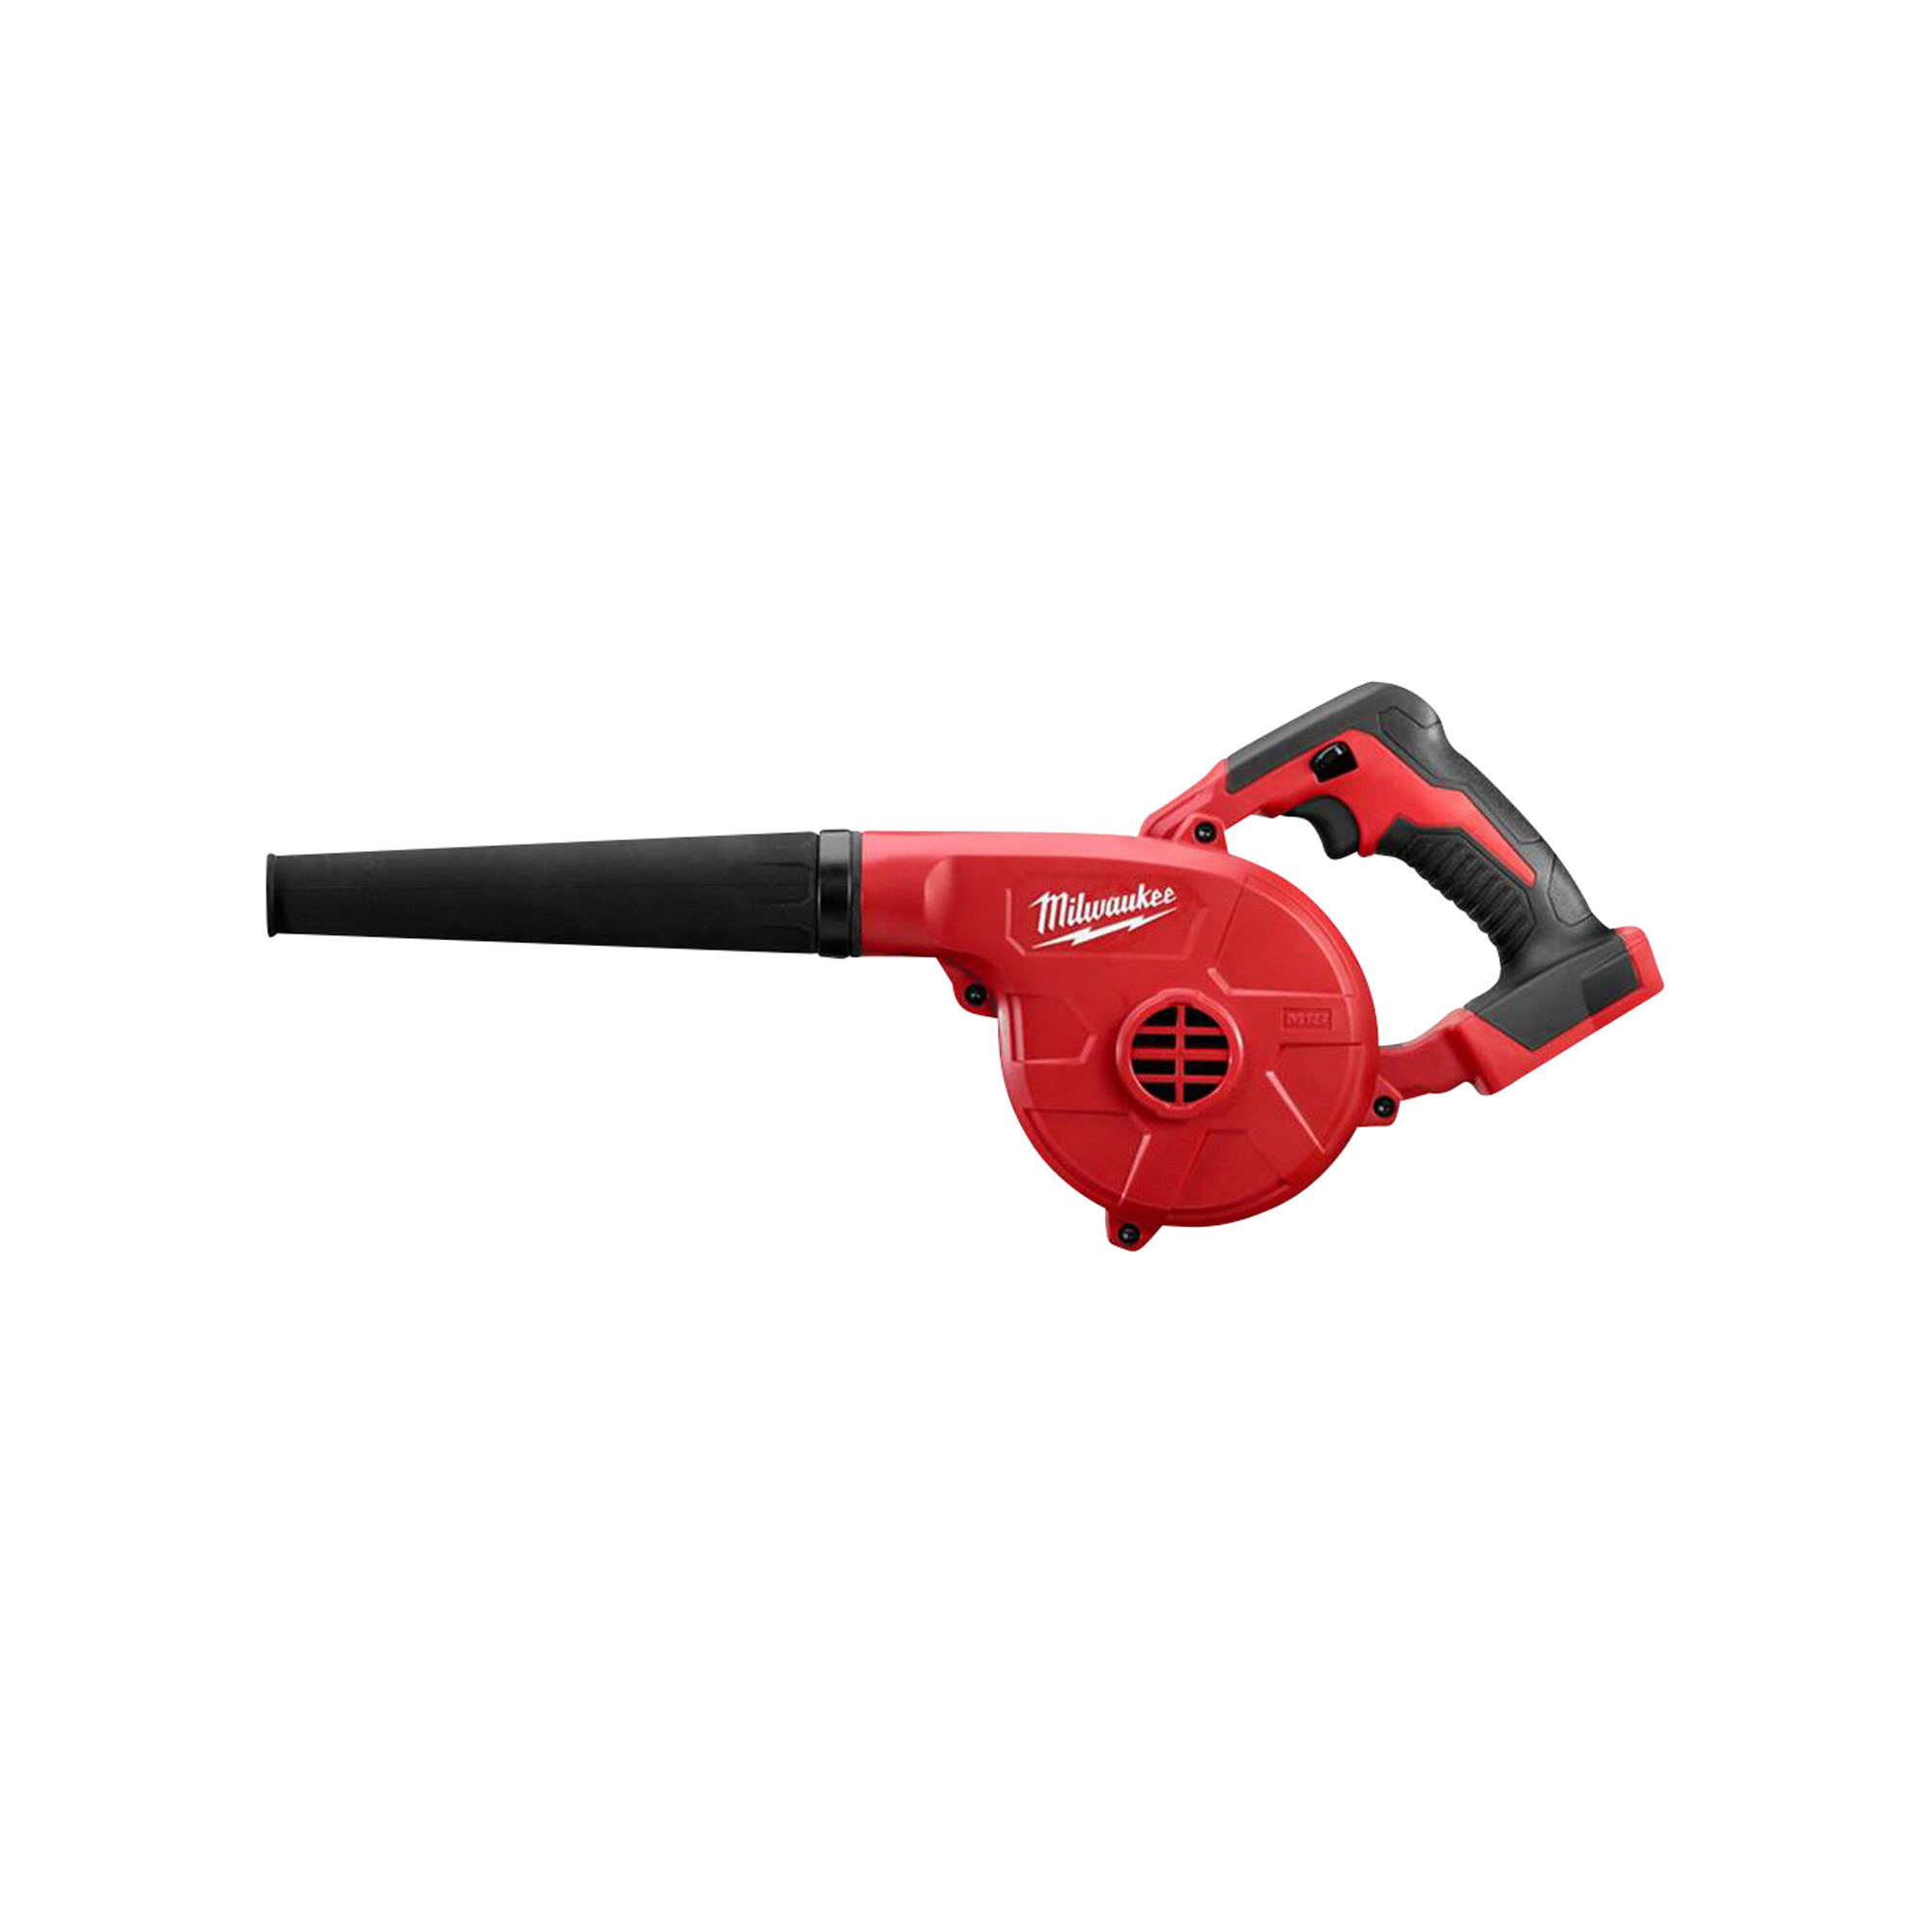 Milwaukee M18 Cordless Compact 100 CFM Blower, Tool Only, Model 0884-20